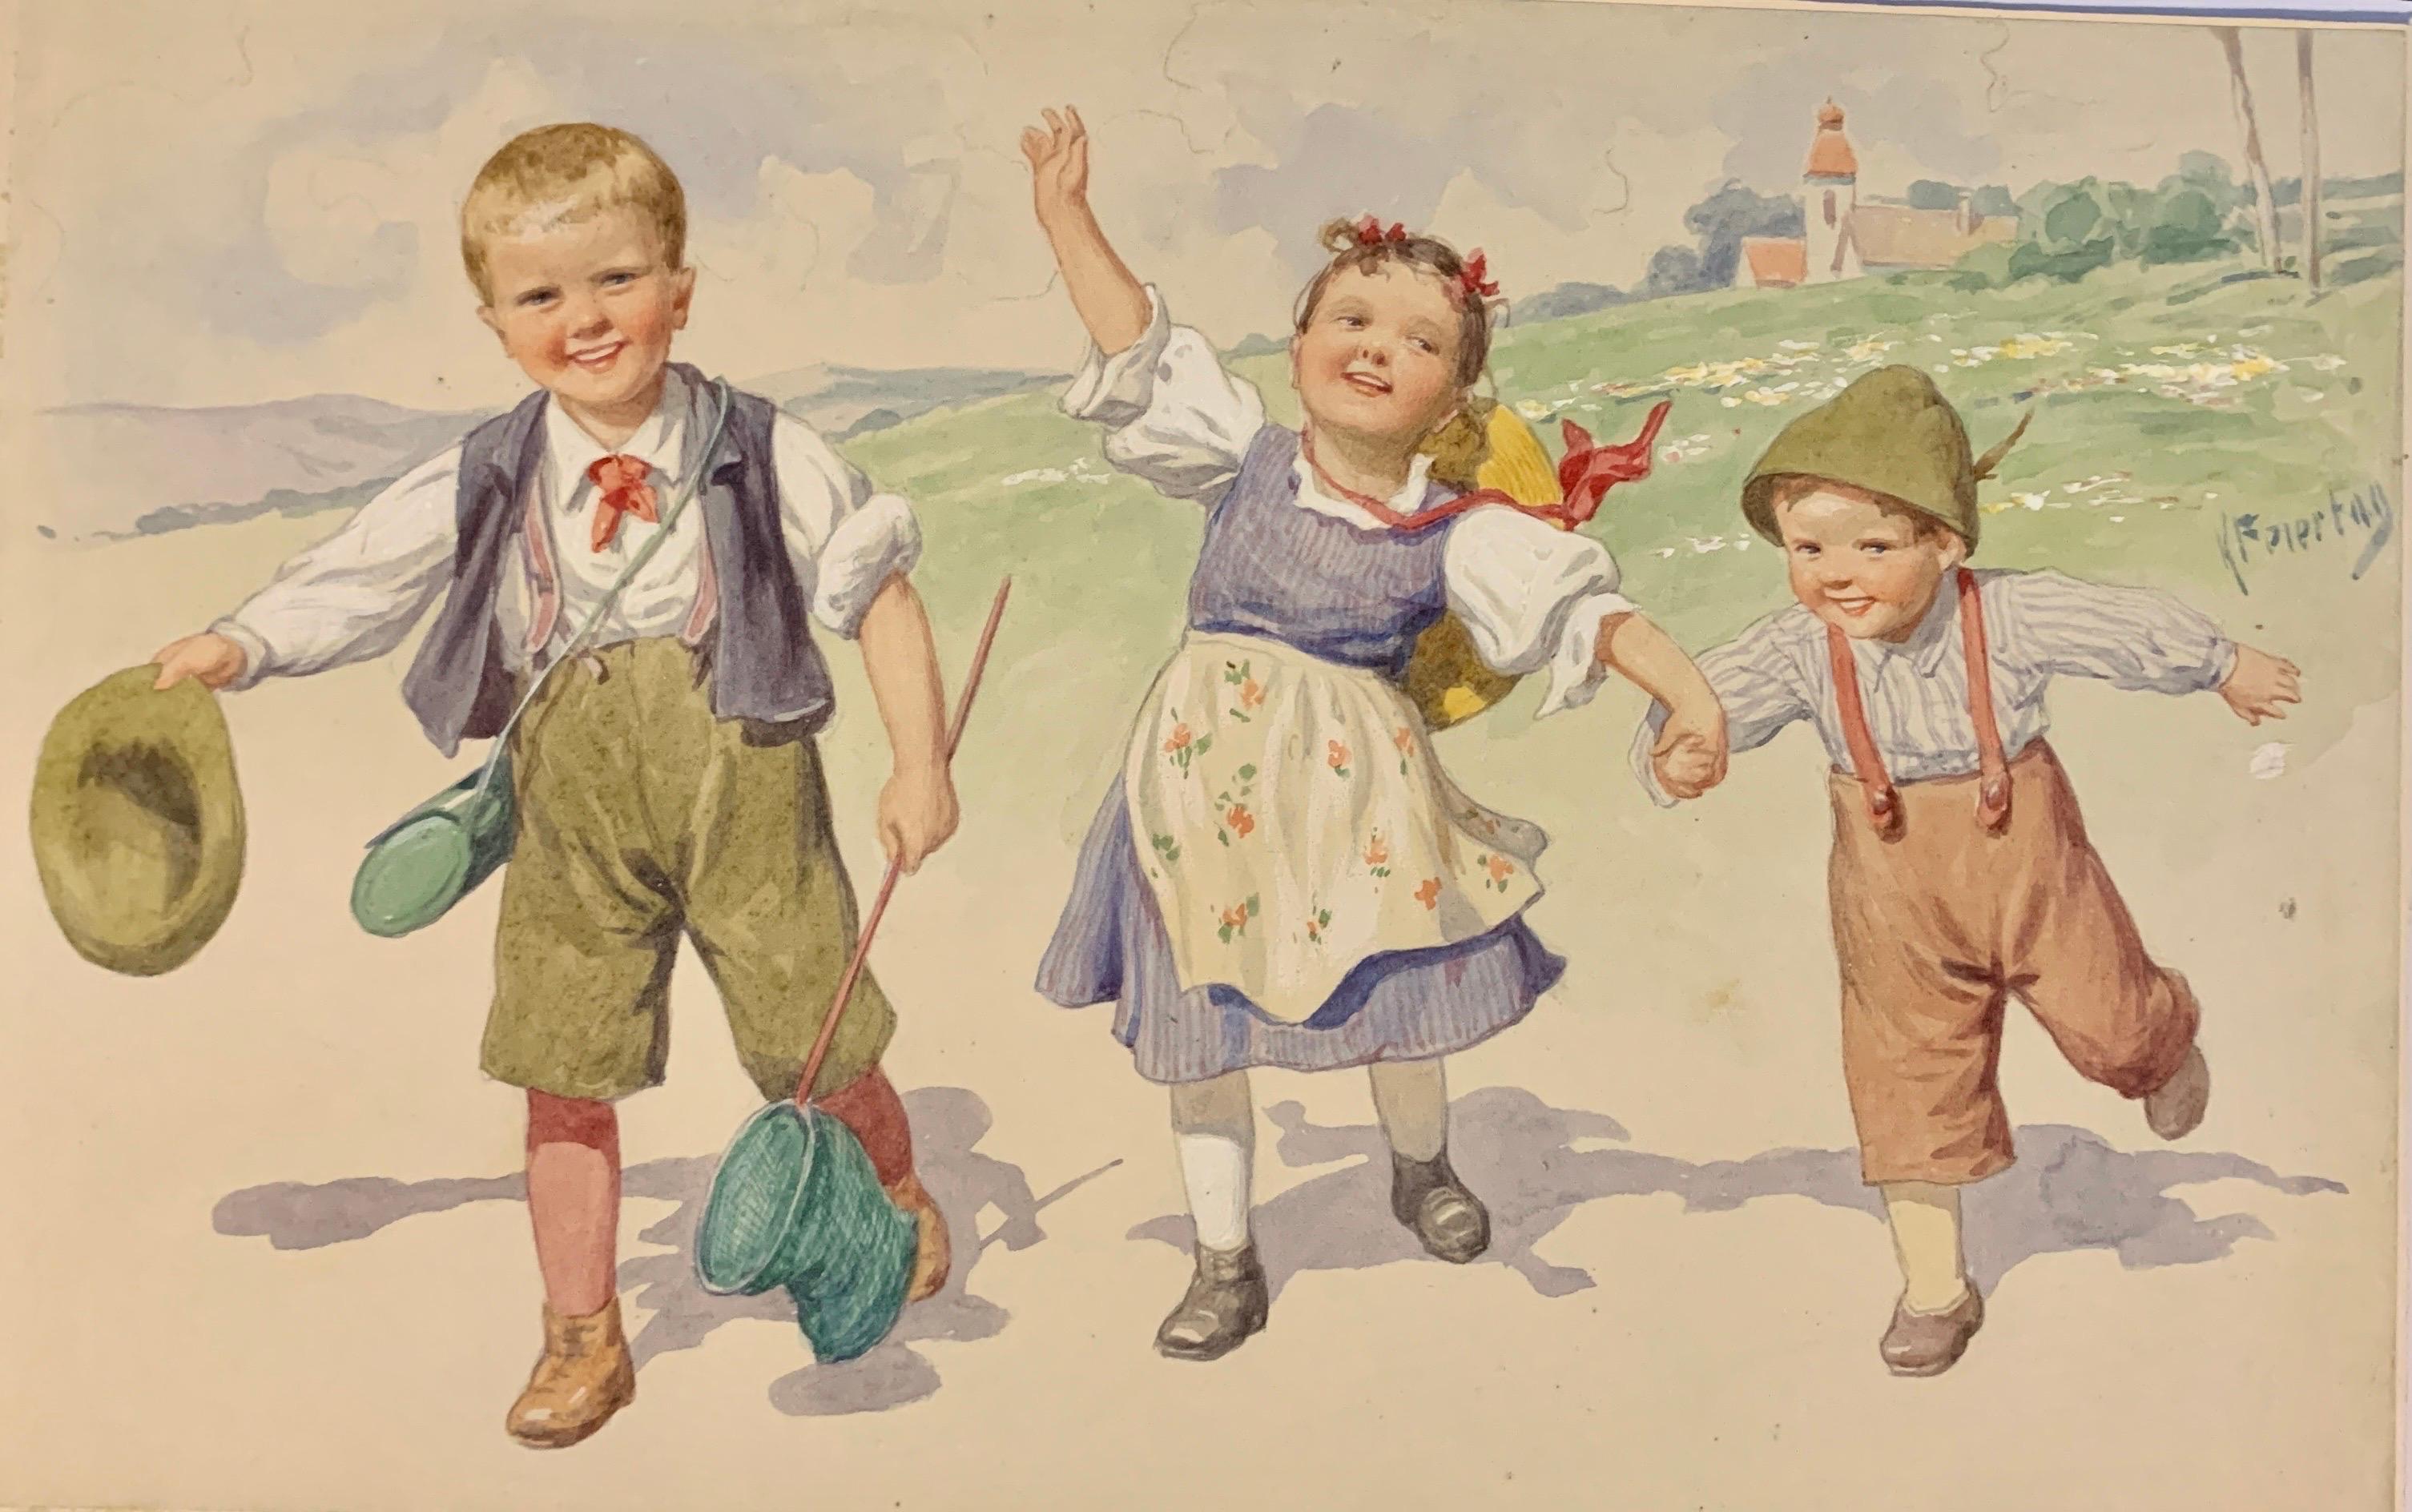 Early 20th century Austrian/German kids playing together in a landscape  - Art by Karl Feiertag